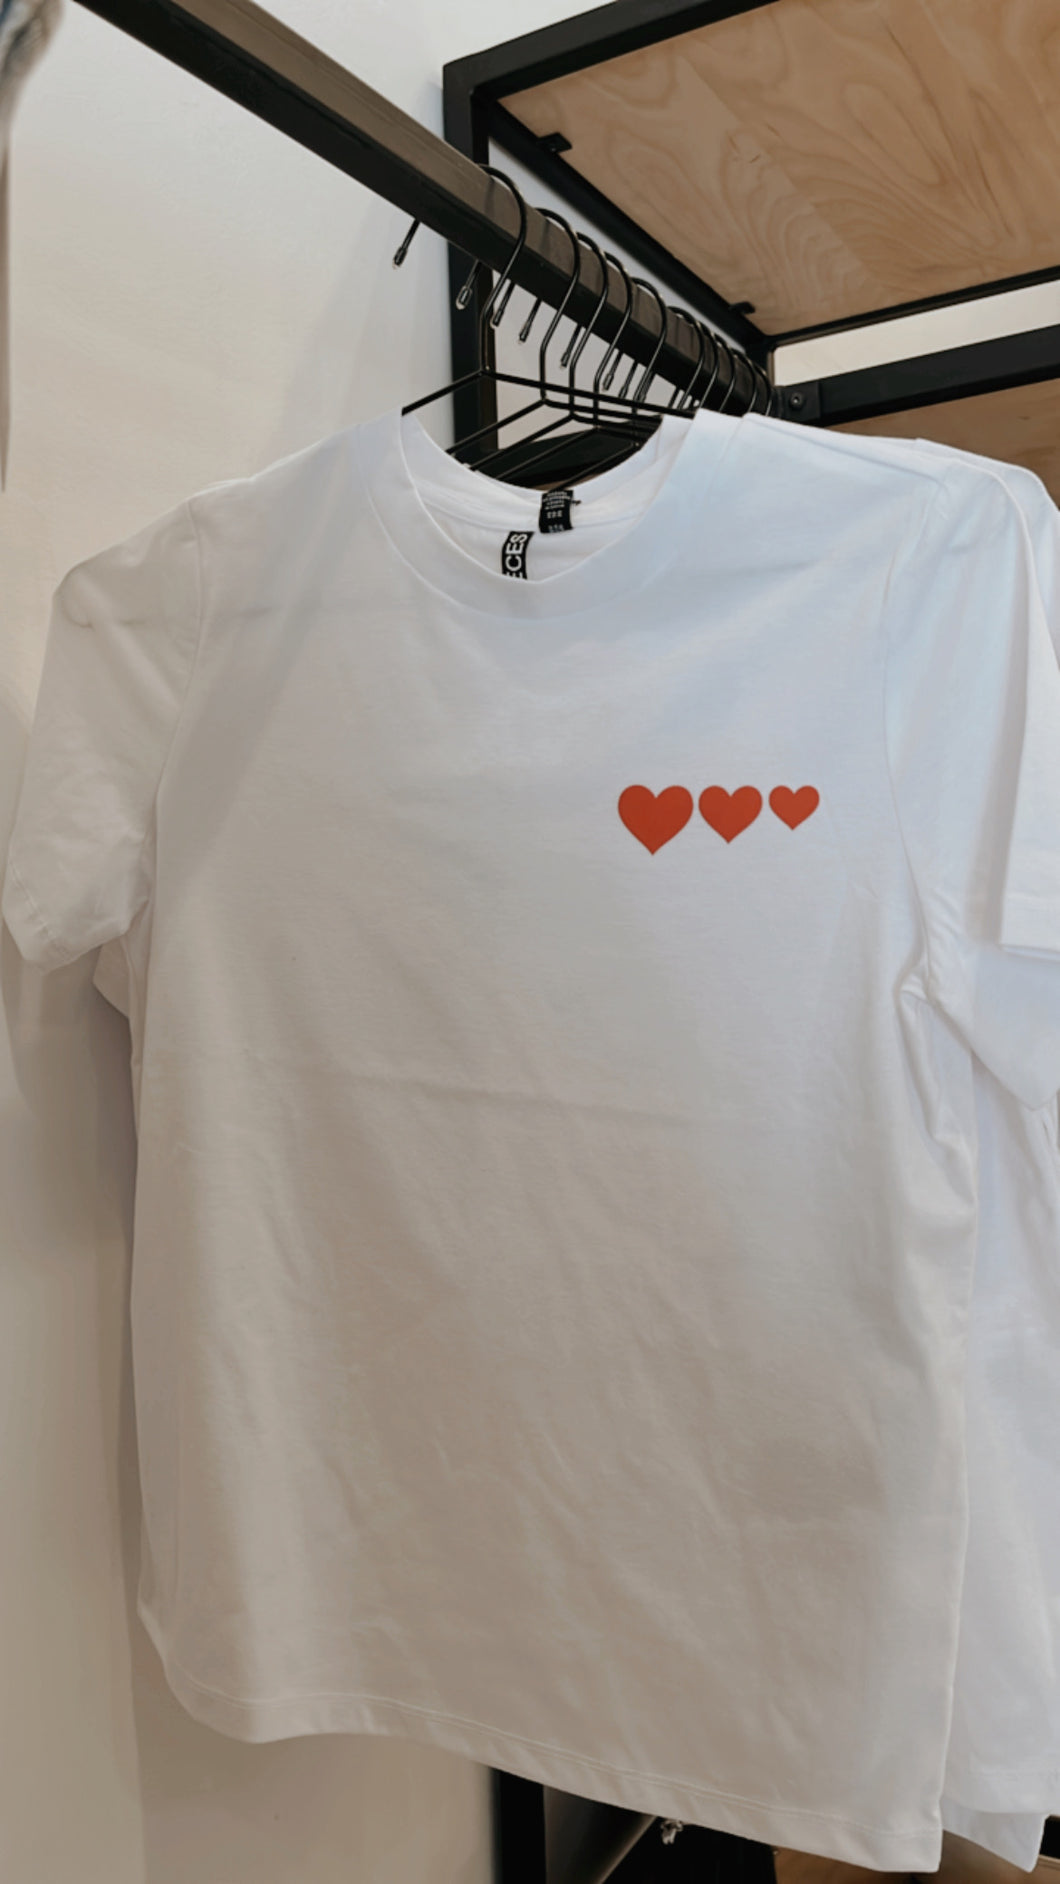 Pieces Clothing - Love Tee